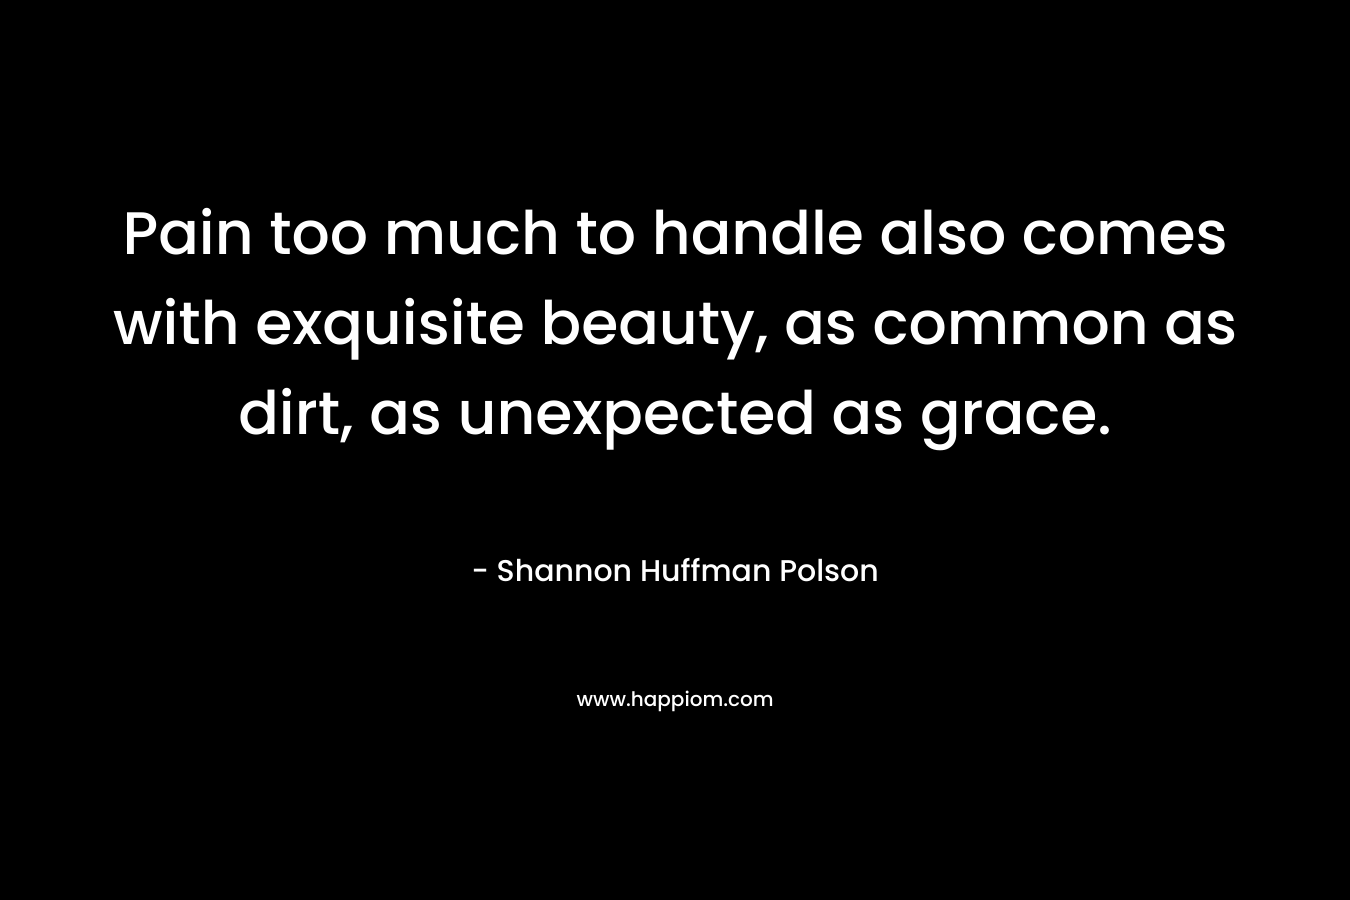 Pain too much to handle also comes with exquisite beauty, as common as dirt, as unexpected as grace. – Shannon Huffman Polson